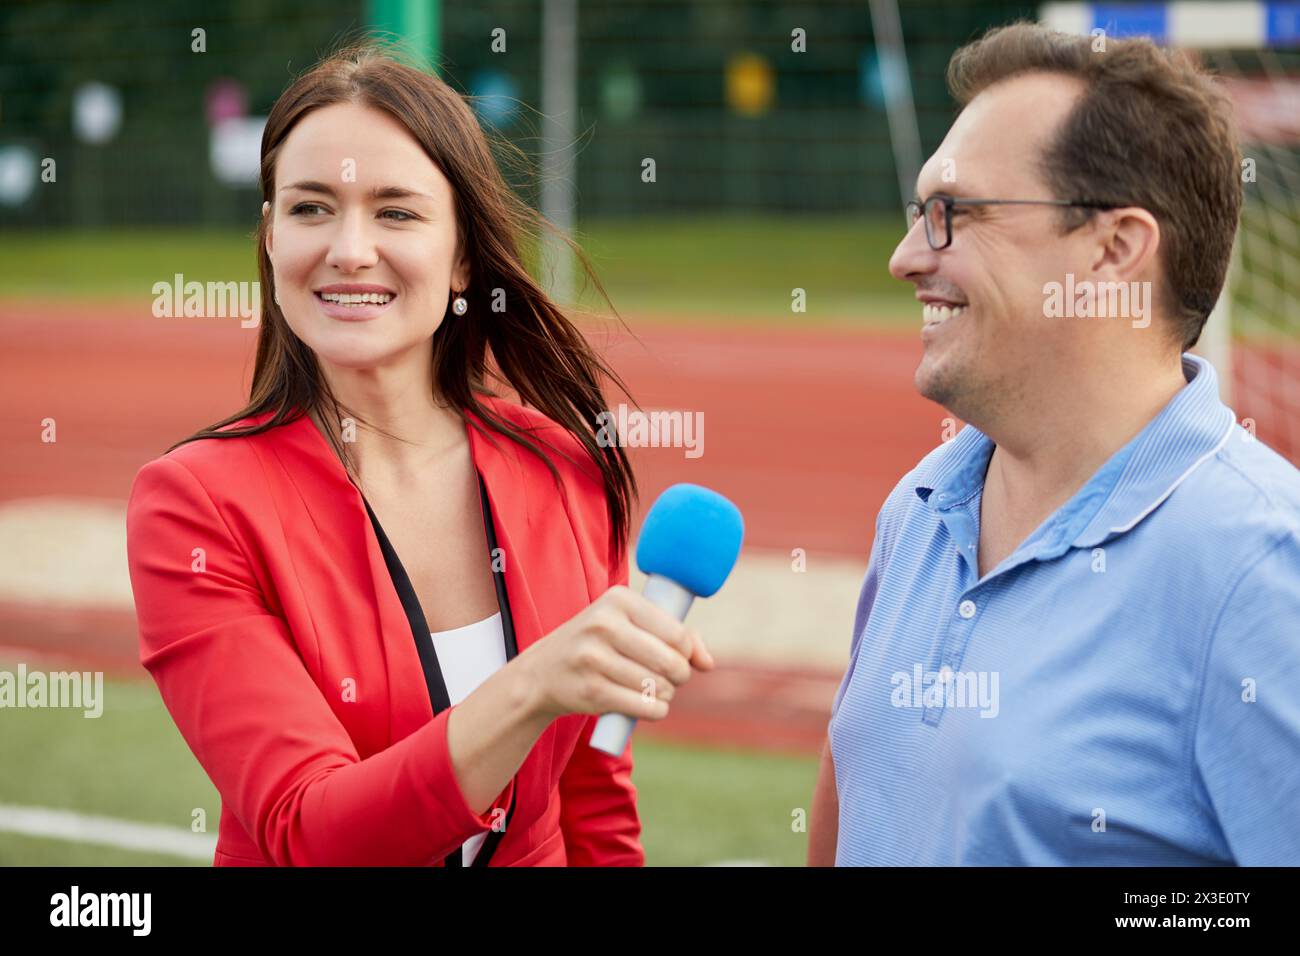 Young female journalist interviews man, focus on woman. Stock Photo